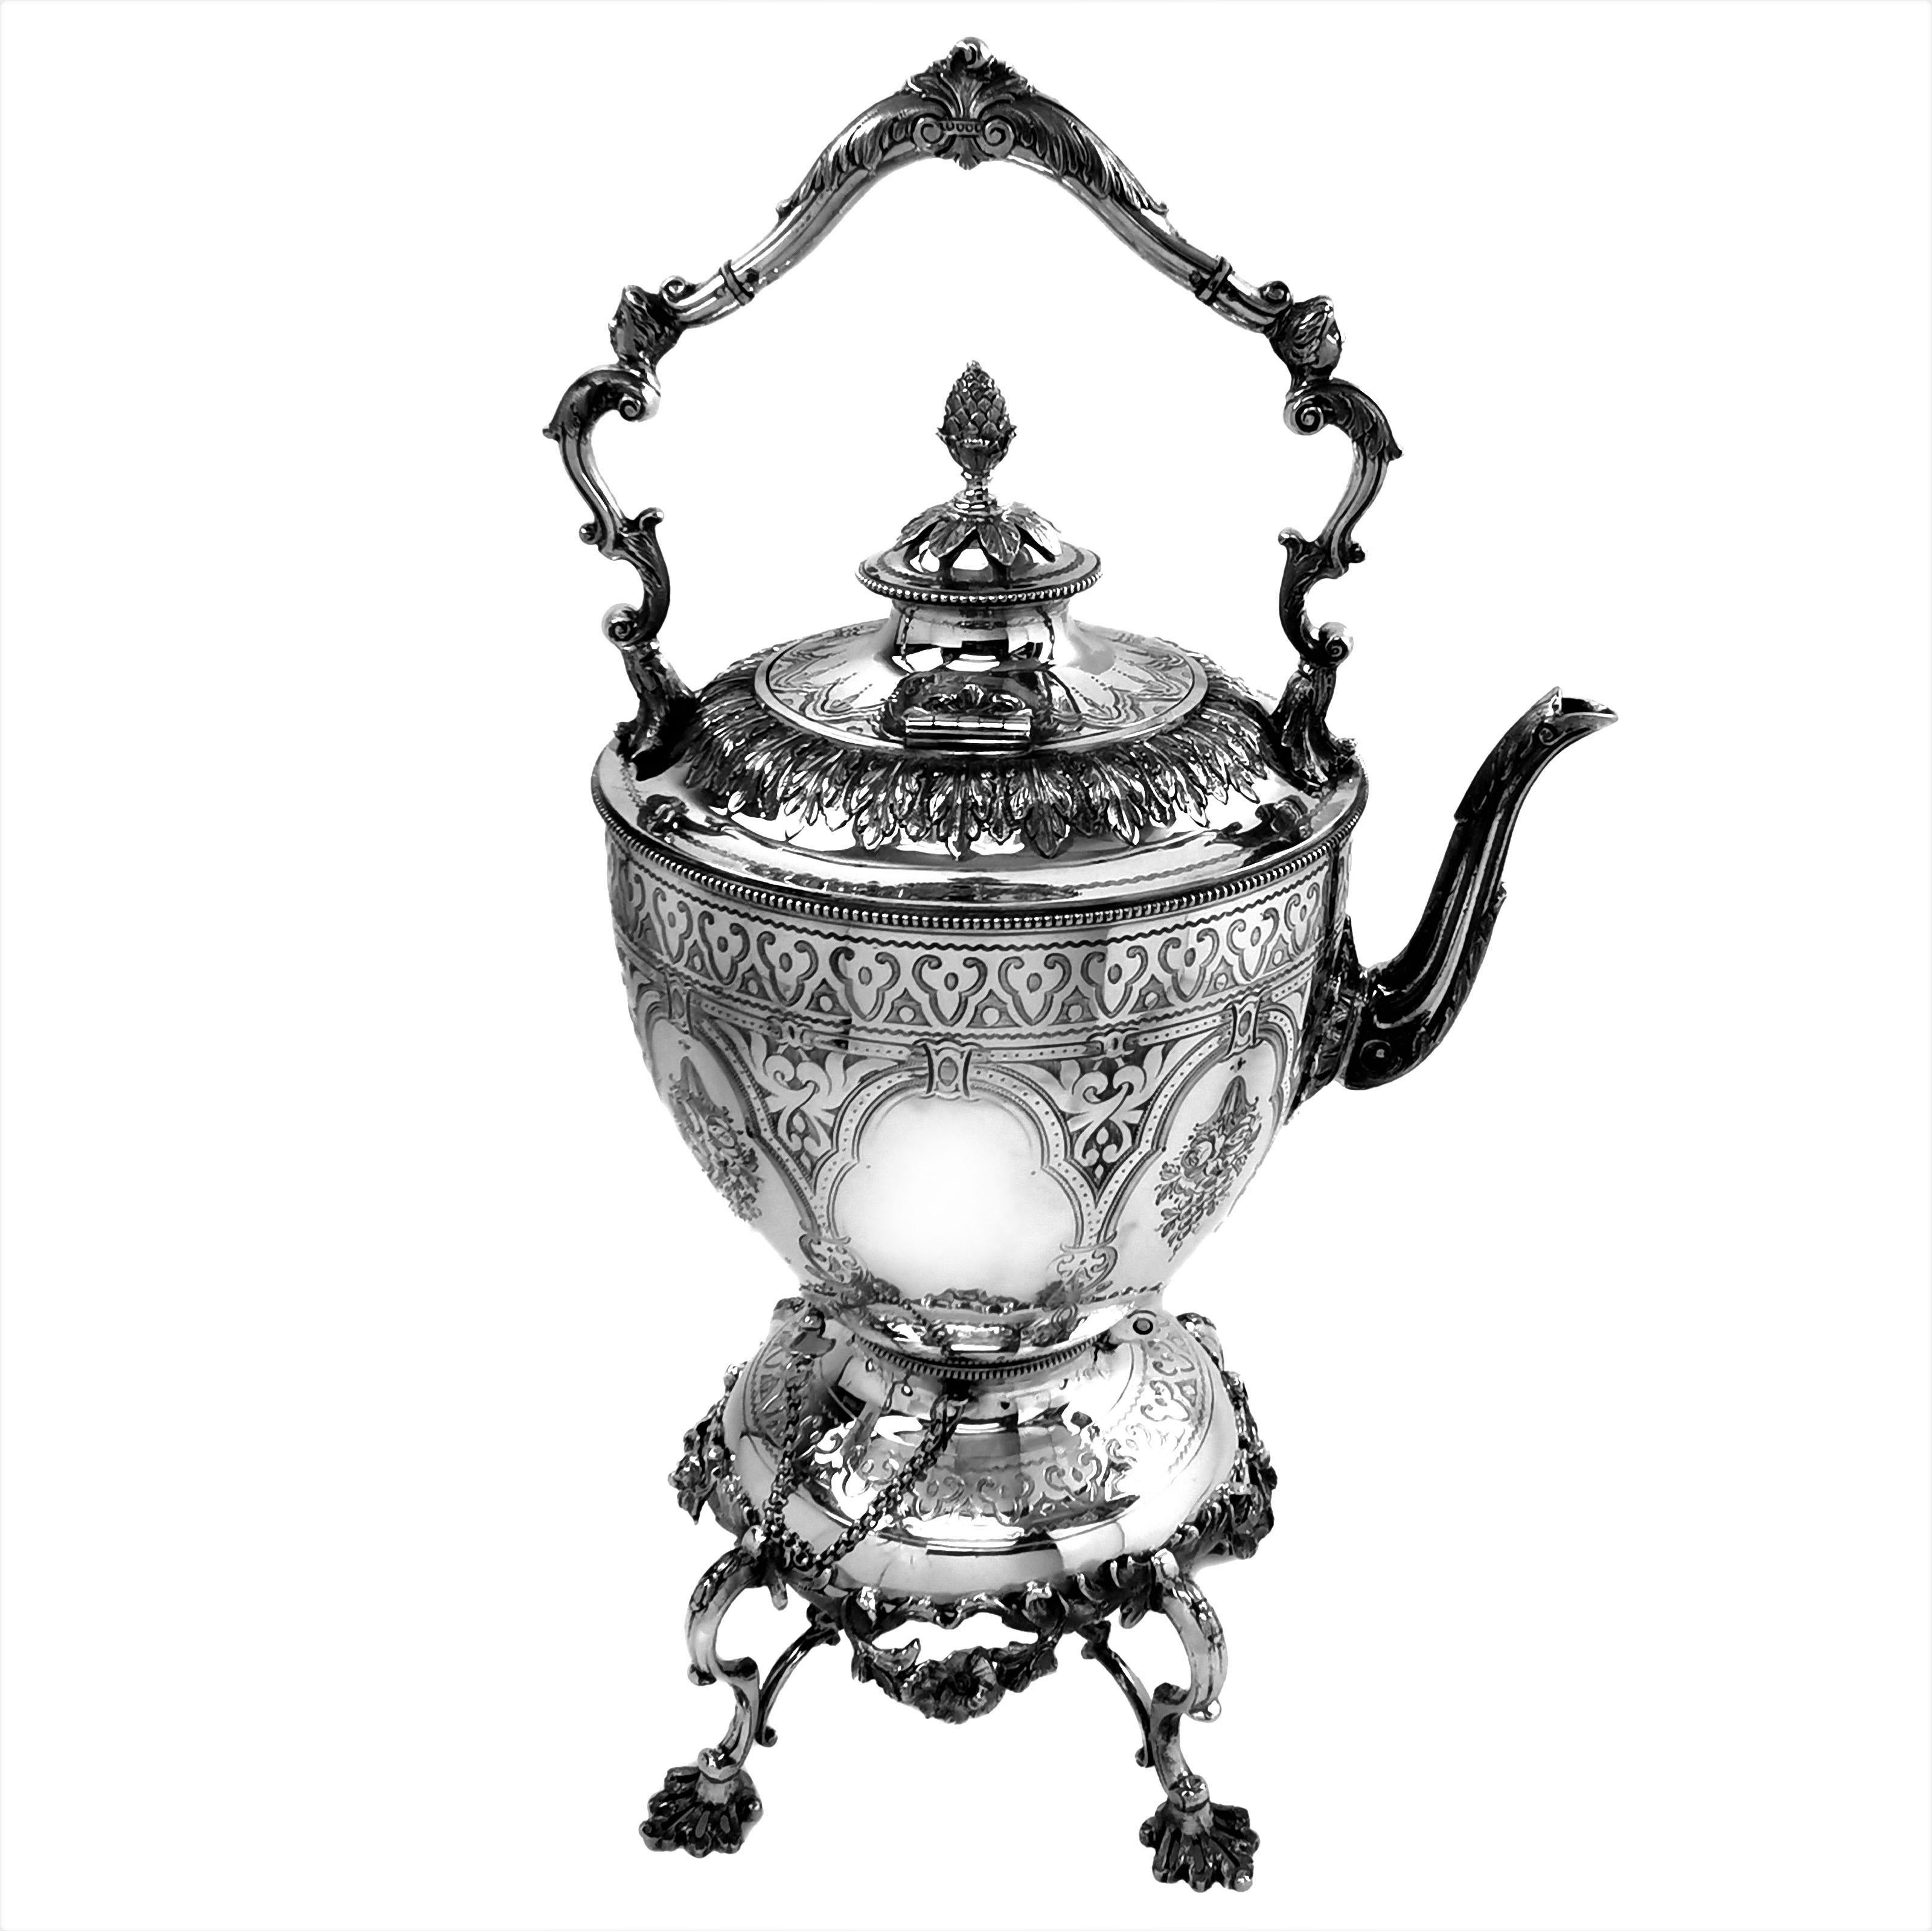 English Antique Victorian 5 Piece Silver Tea and Coffee Set with Kettle, 1881 / 82 For Sale